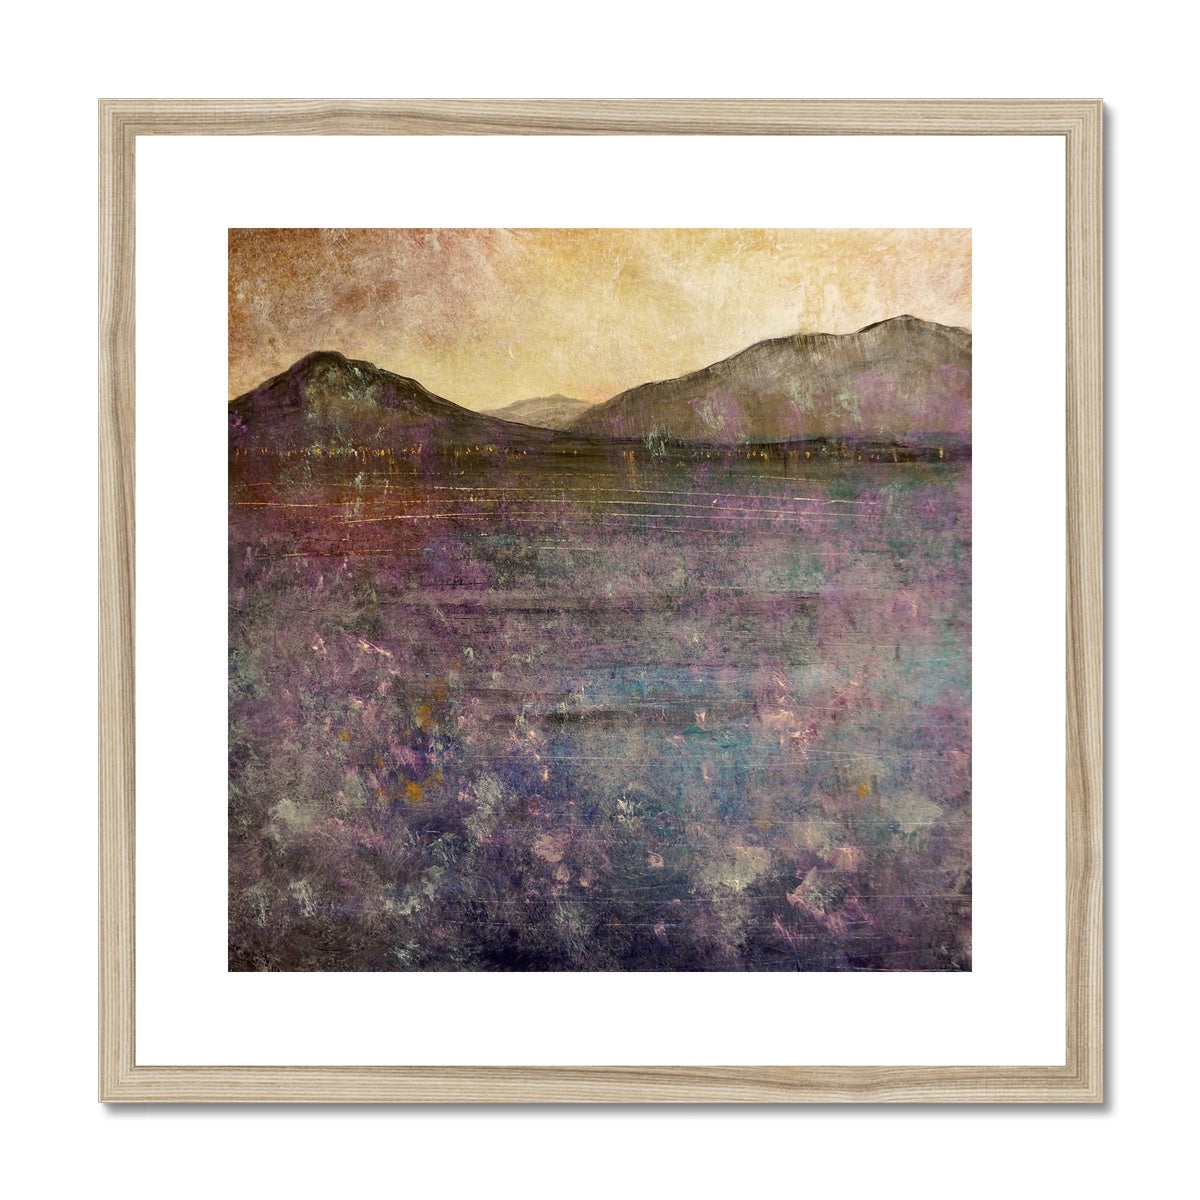 River Clyde Winter Dusk Painting | Framed & Mounted Prints From Scotland-Framed & Mounted Prints-River Clyde Art Gallery-20"x20"-Natural Frame-Paintings, Prints, Homeware, Art Gifts From Scotland By Scottish Artist Kevin Hunter